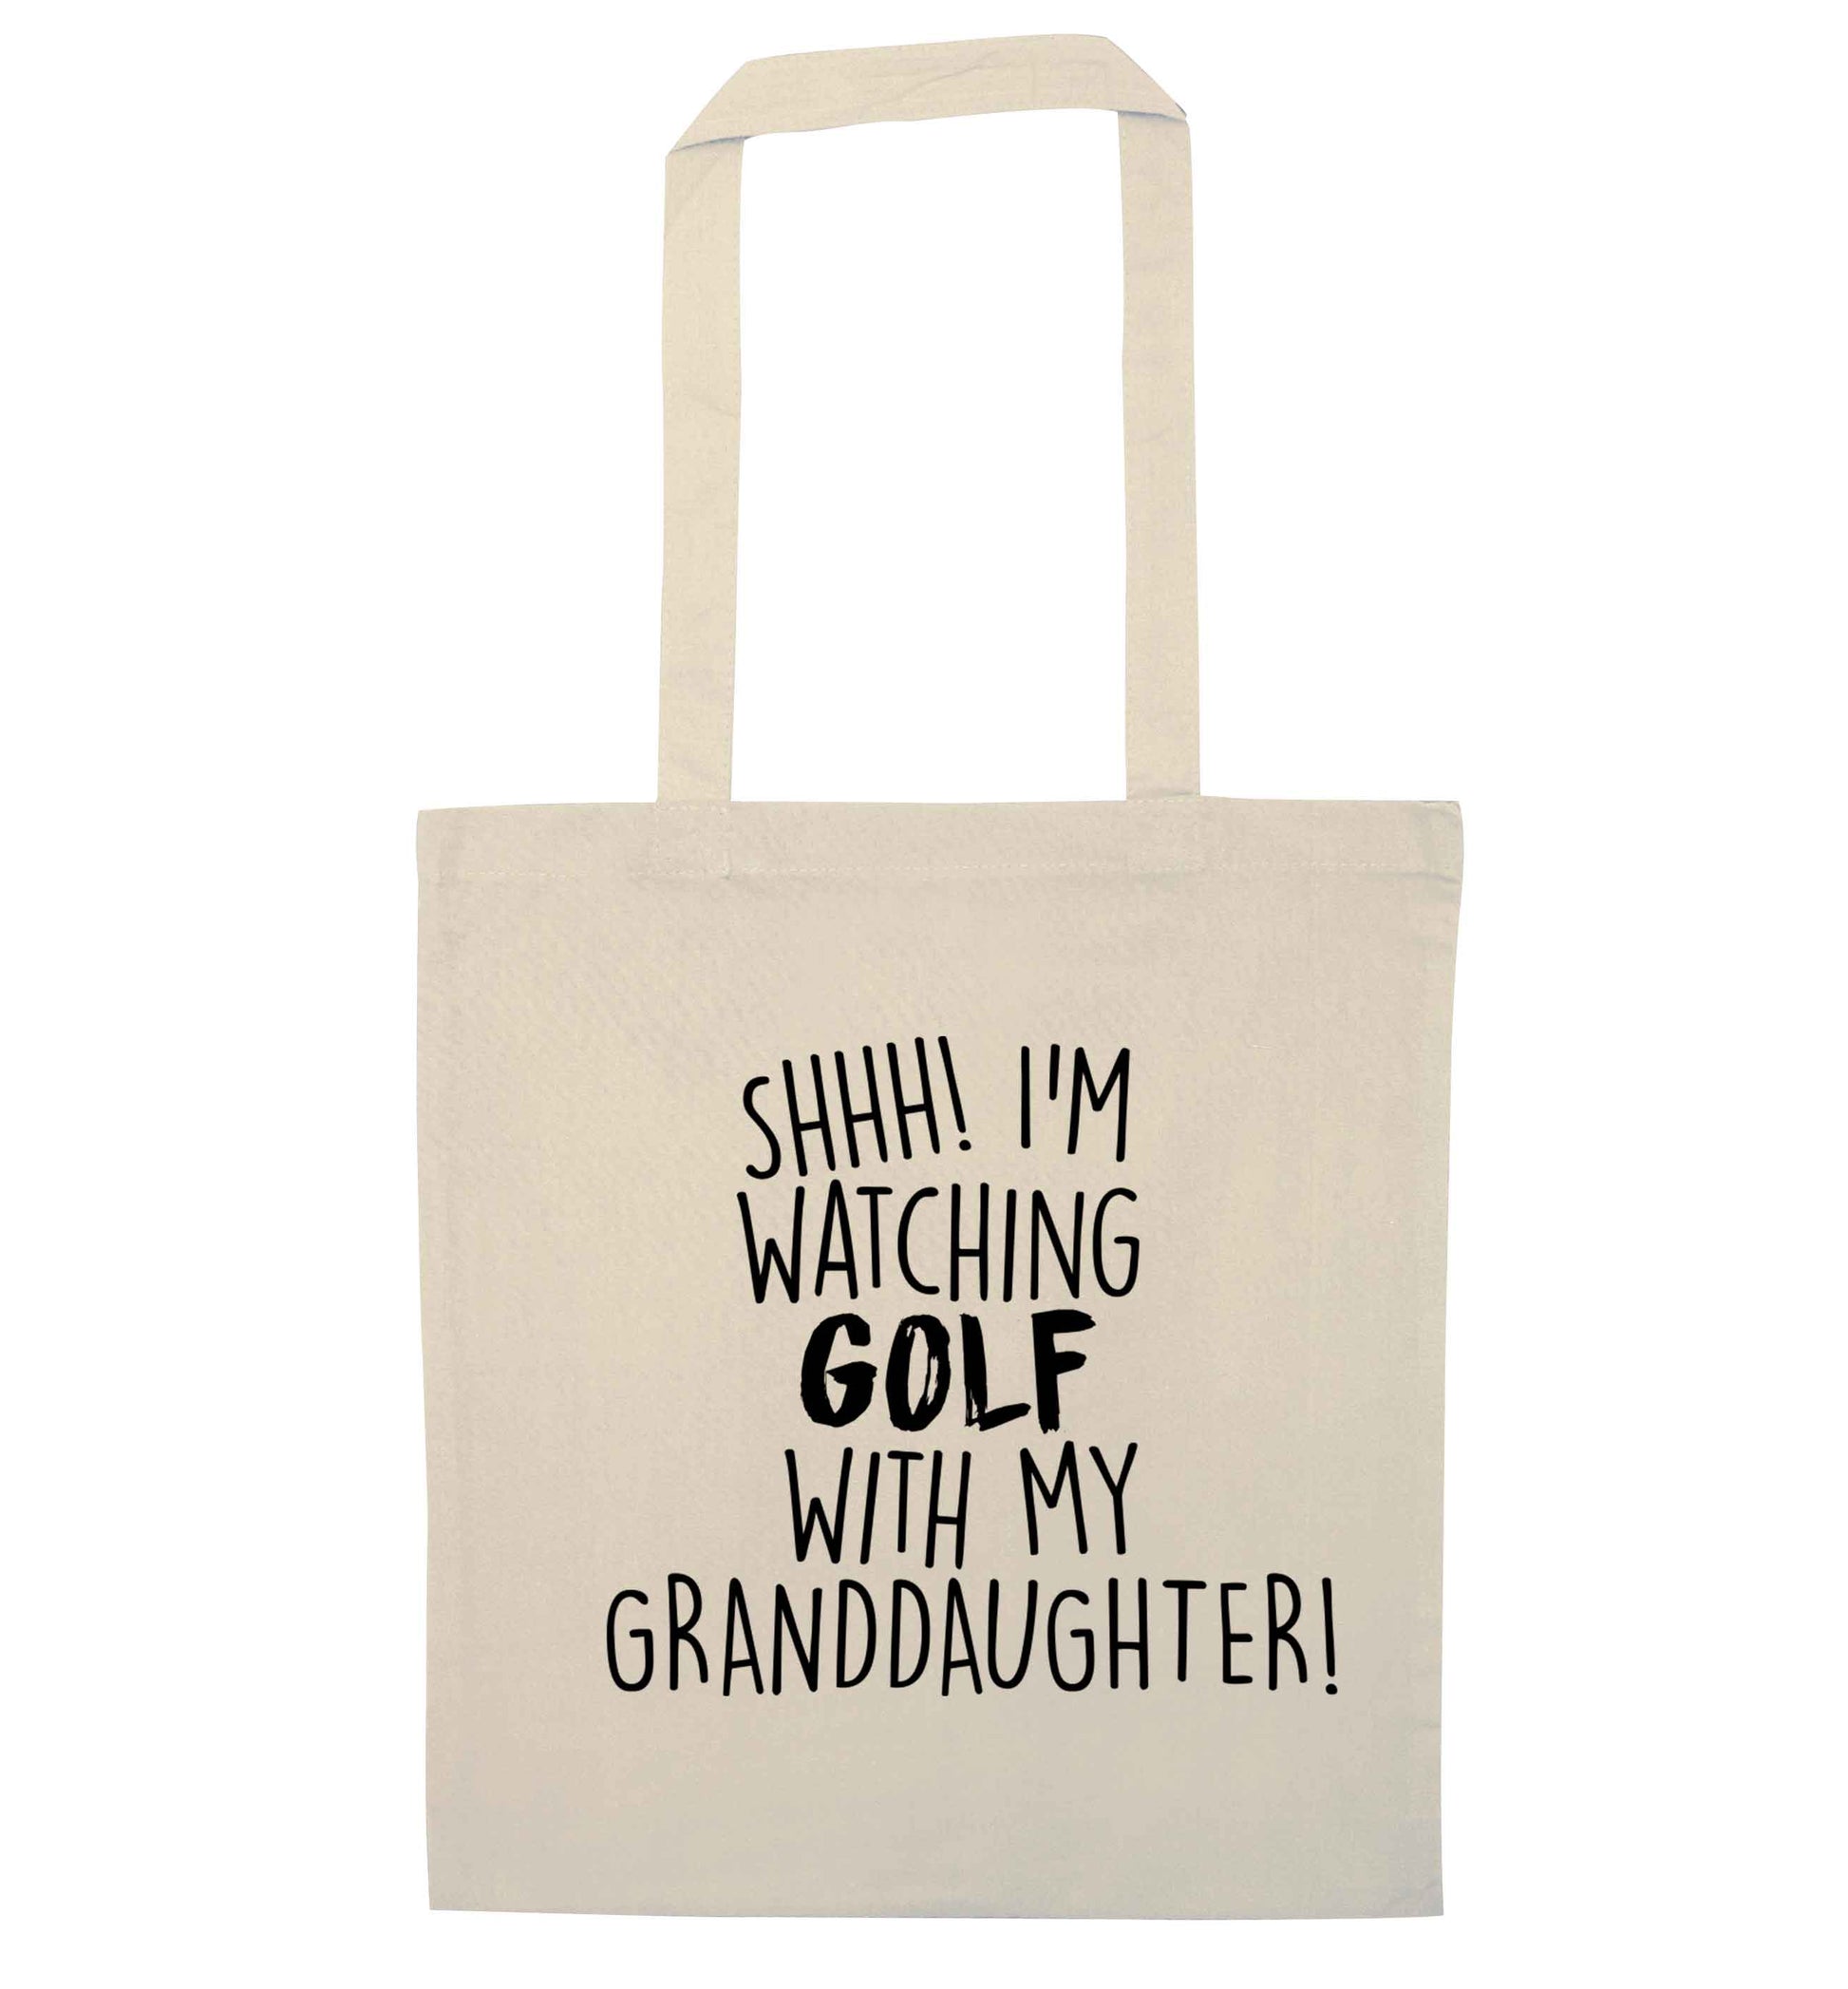 Shh I'm watching golf with my granddaughter natural tote bag